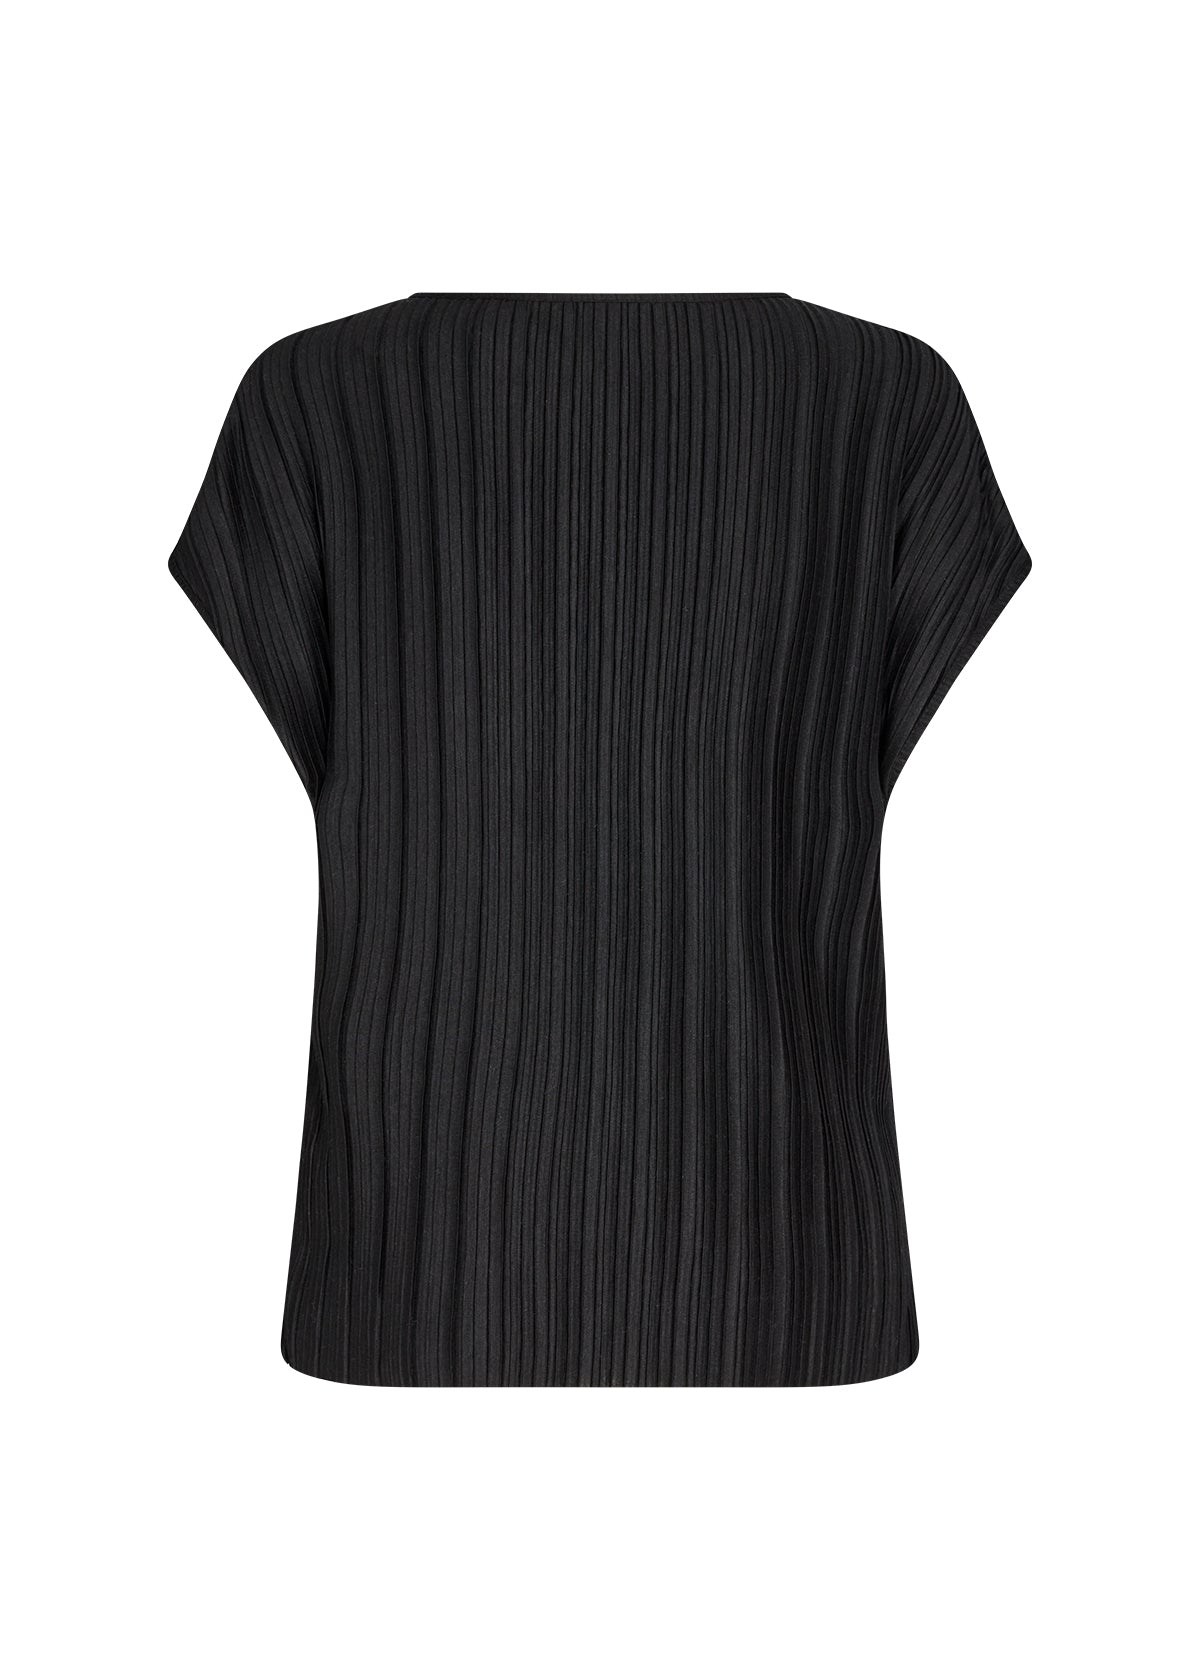 Soya Concept pleated top